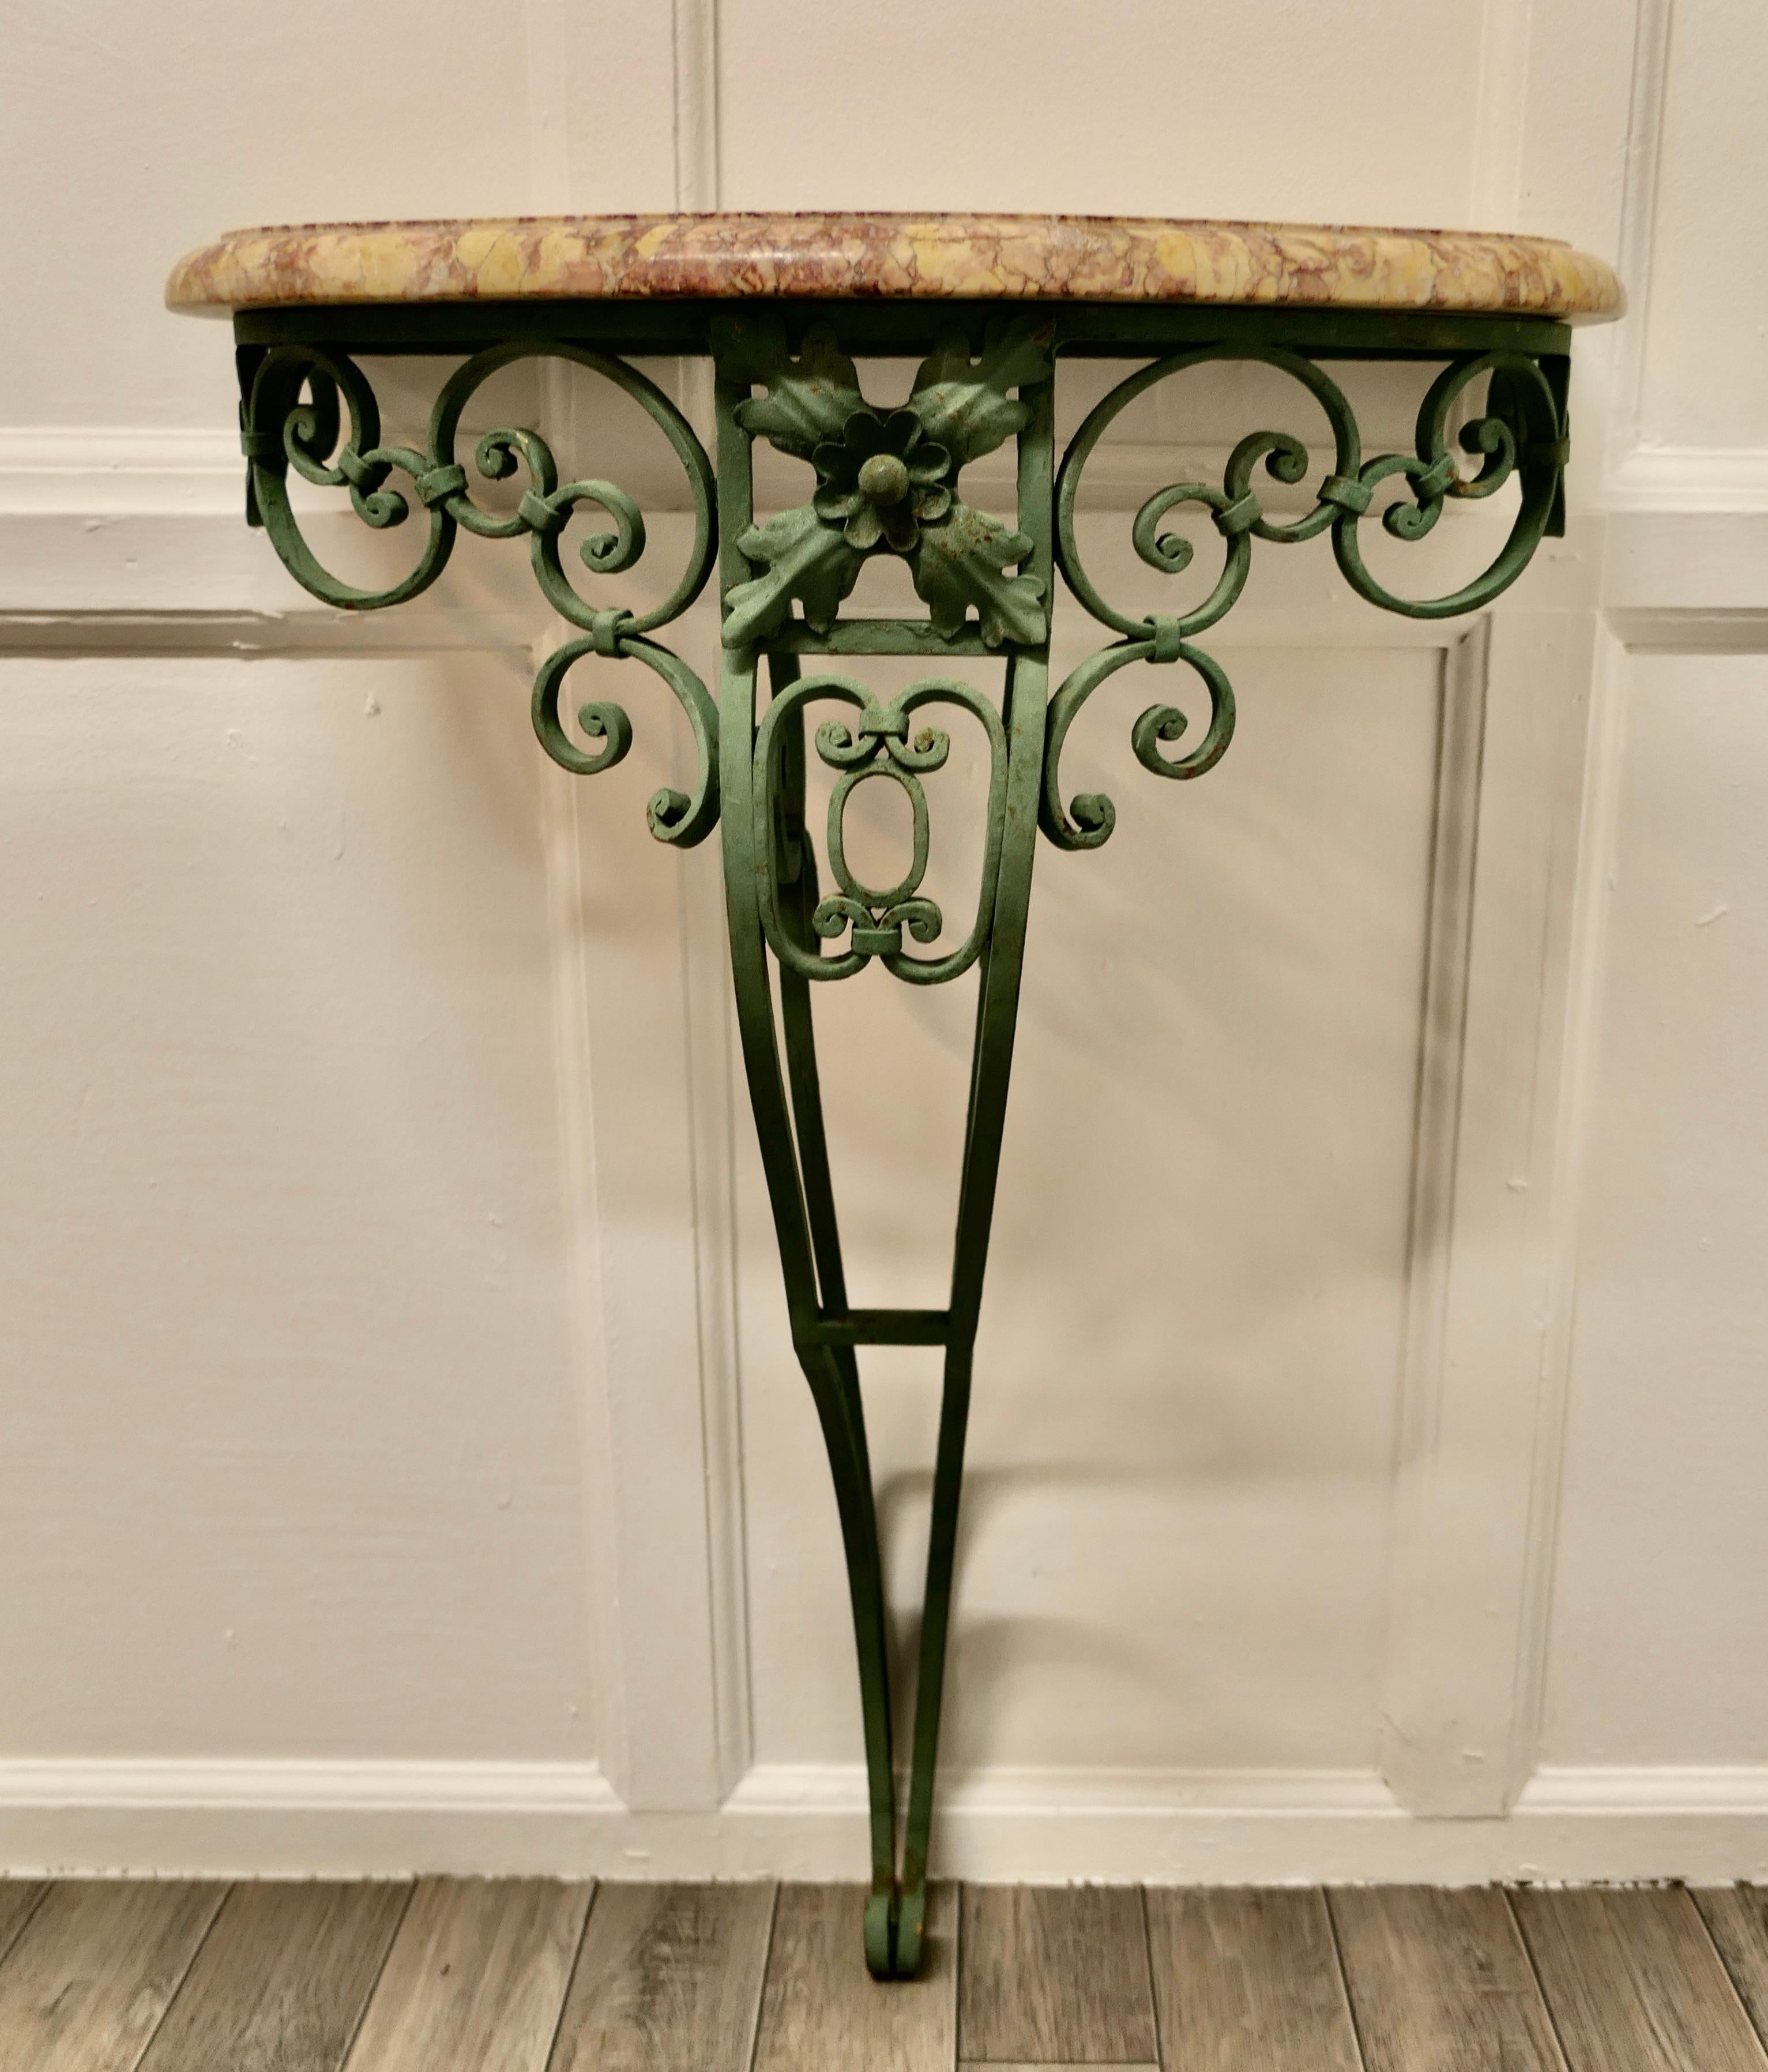 Old Wrought Iron French Marble Console or Hall Table

This is a very attractive piece, the table has decorative scroll and shell decoration to the iron leg which is in a shabby moss green
The table top is a curved shape with a pink and peach